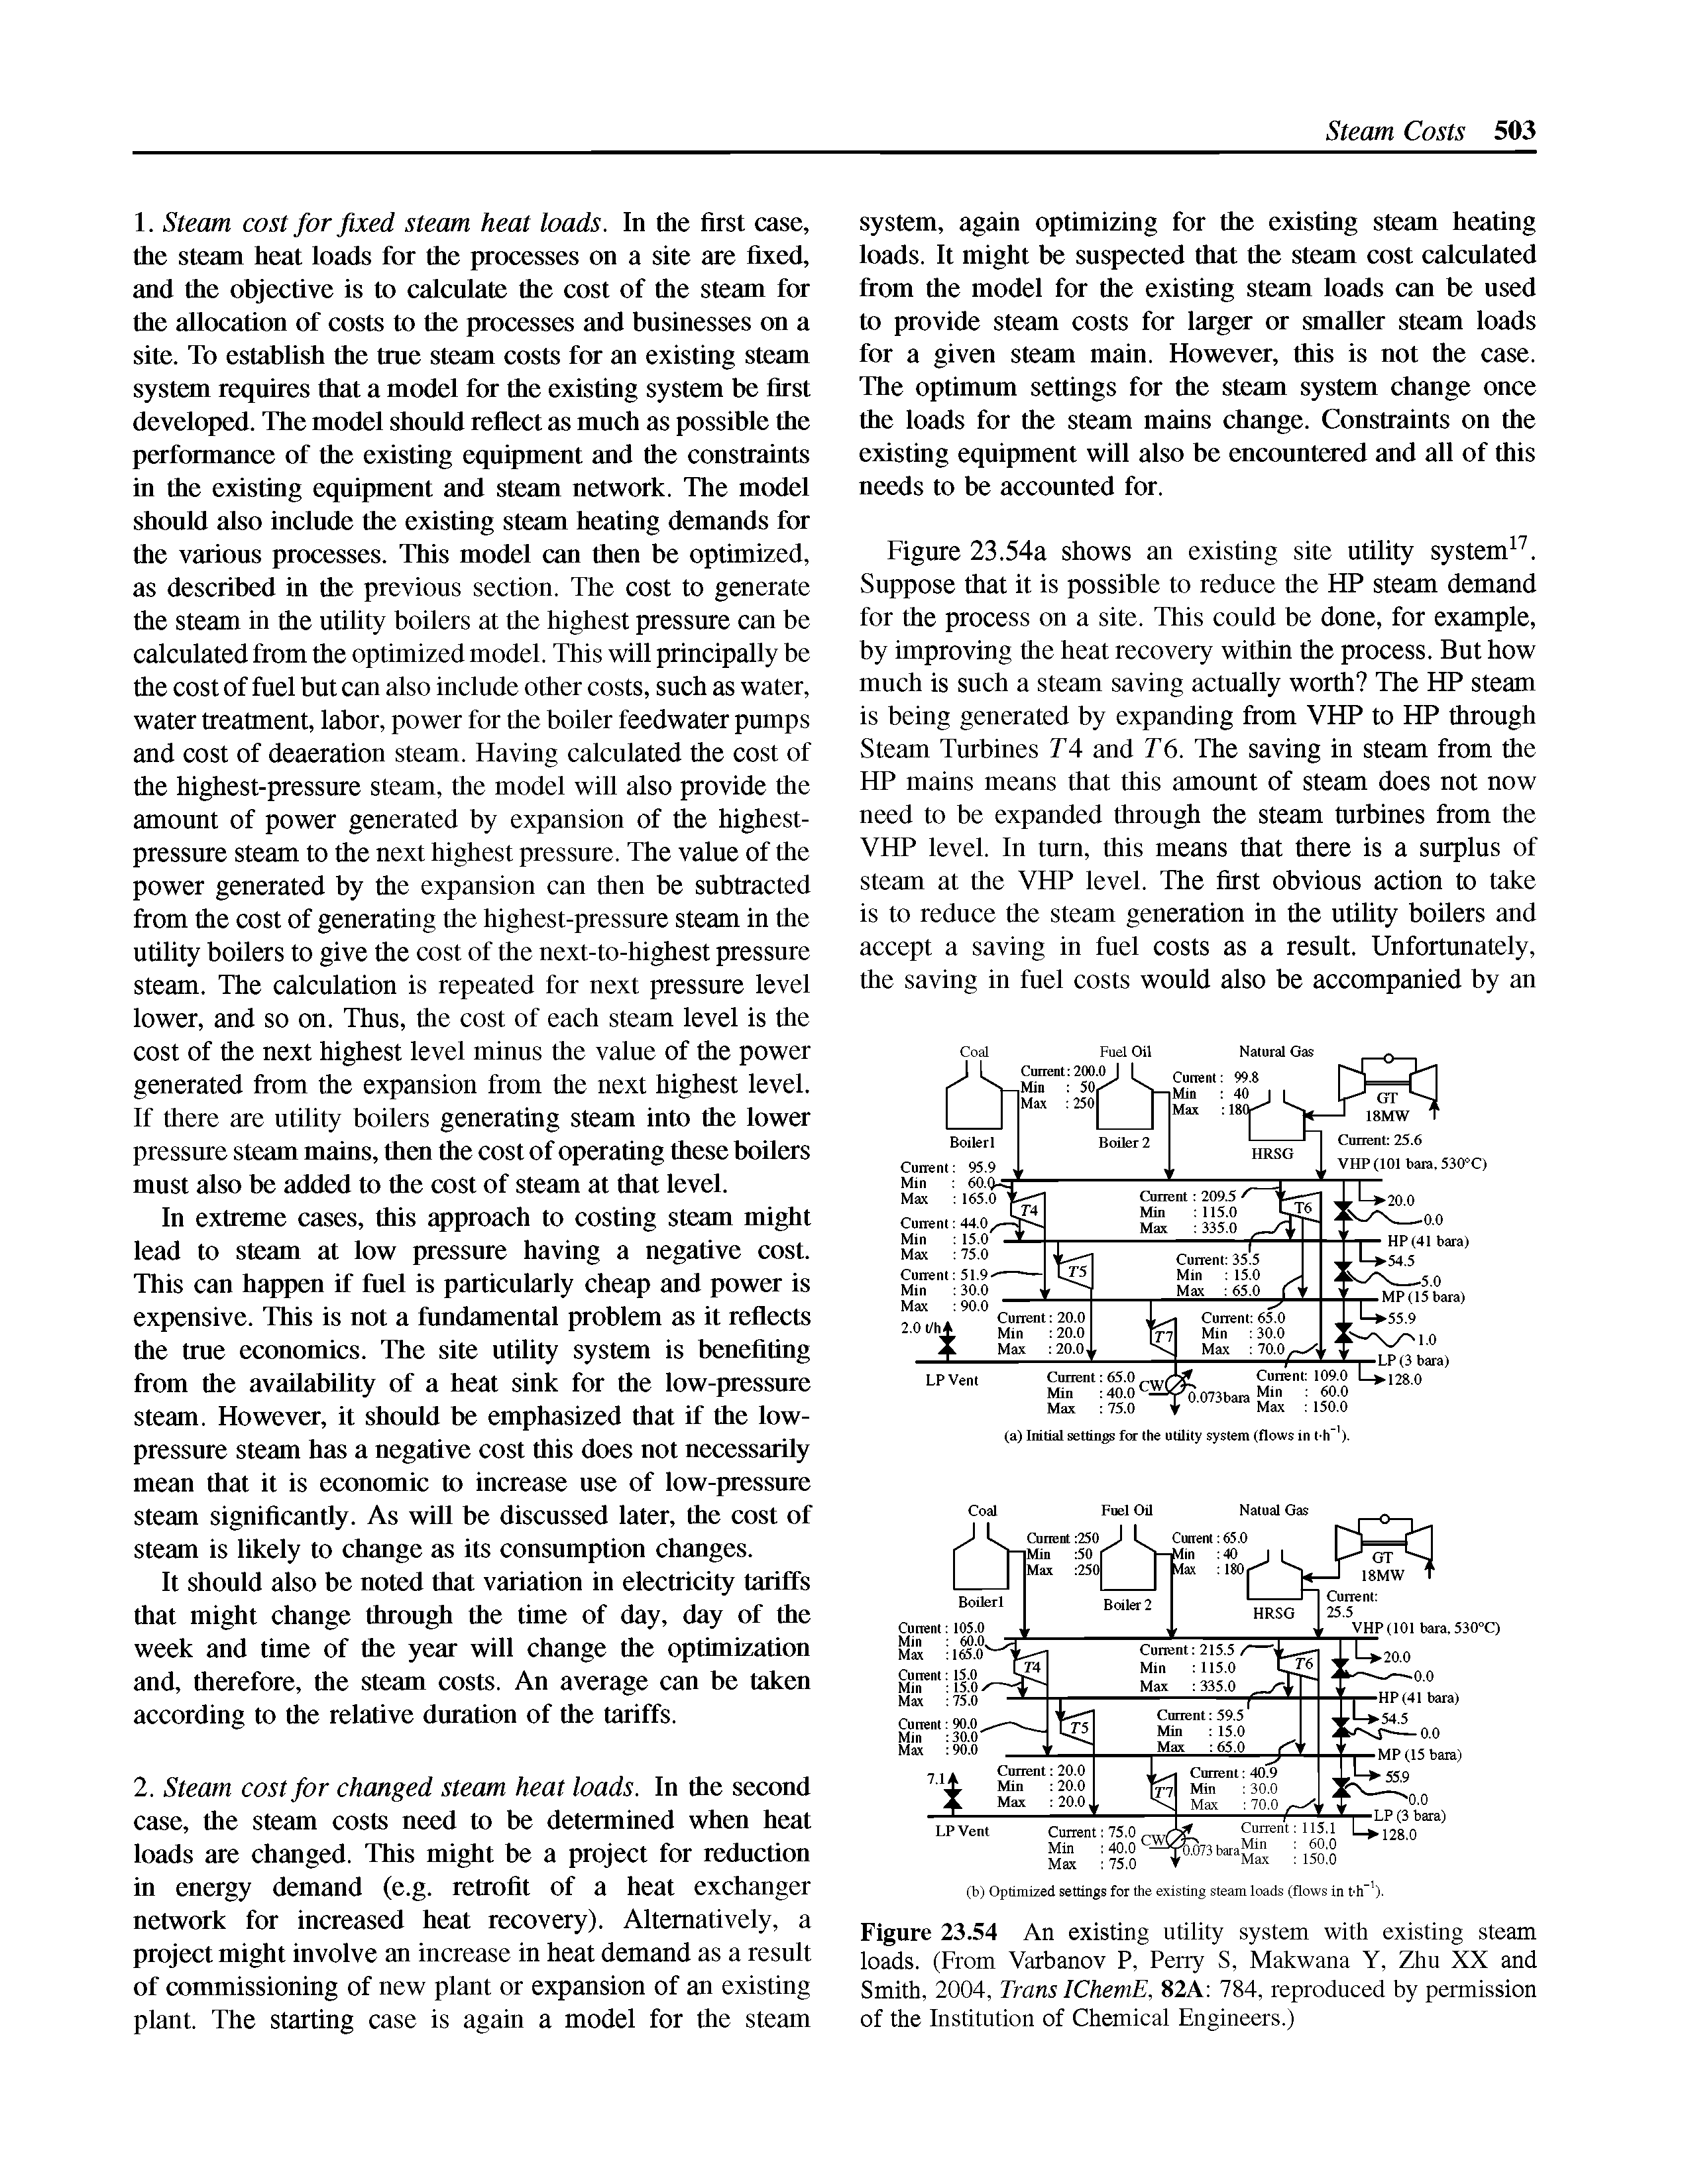 Figure 23.54 An existing utility system with existing steam loads. (From Varbanov P, Perry S, Makwana Y, Zhu XX and Smith, 2004, Trans IChemE, 82A 784, reproduced by permission of the Institution of Chemical Engineers.)...